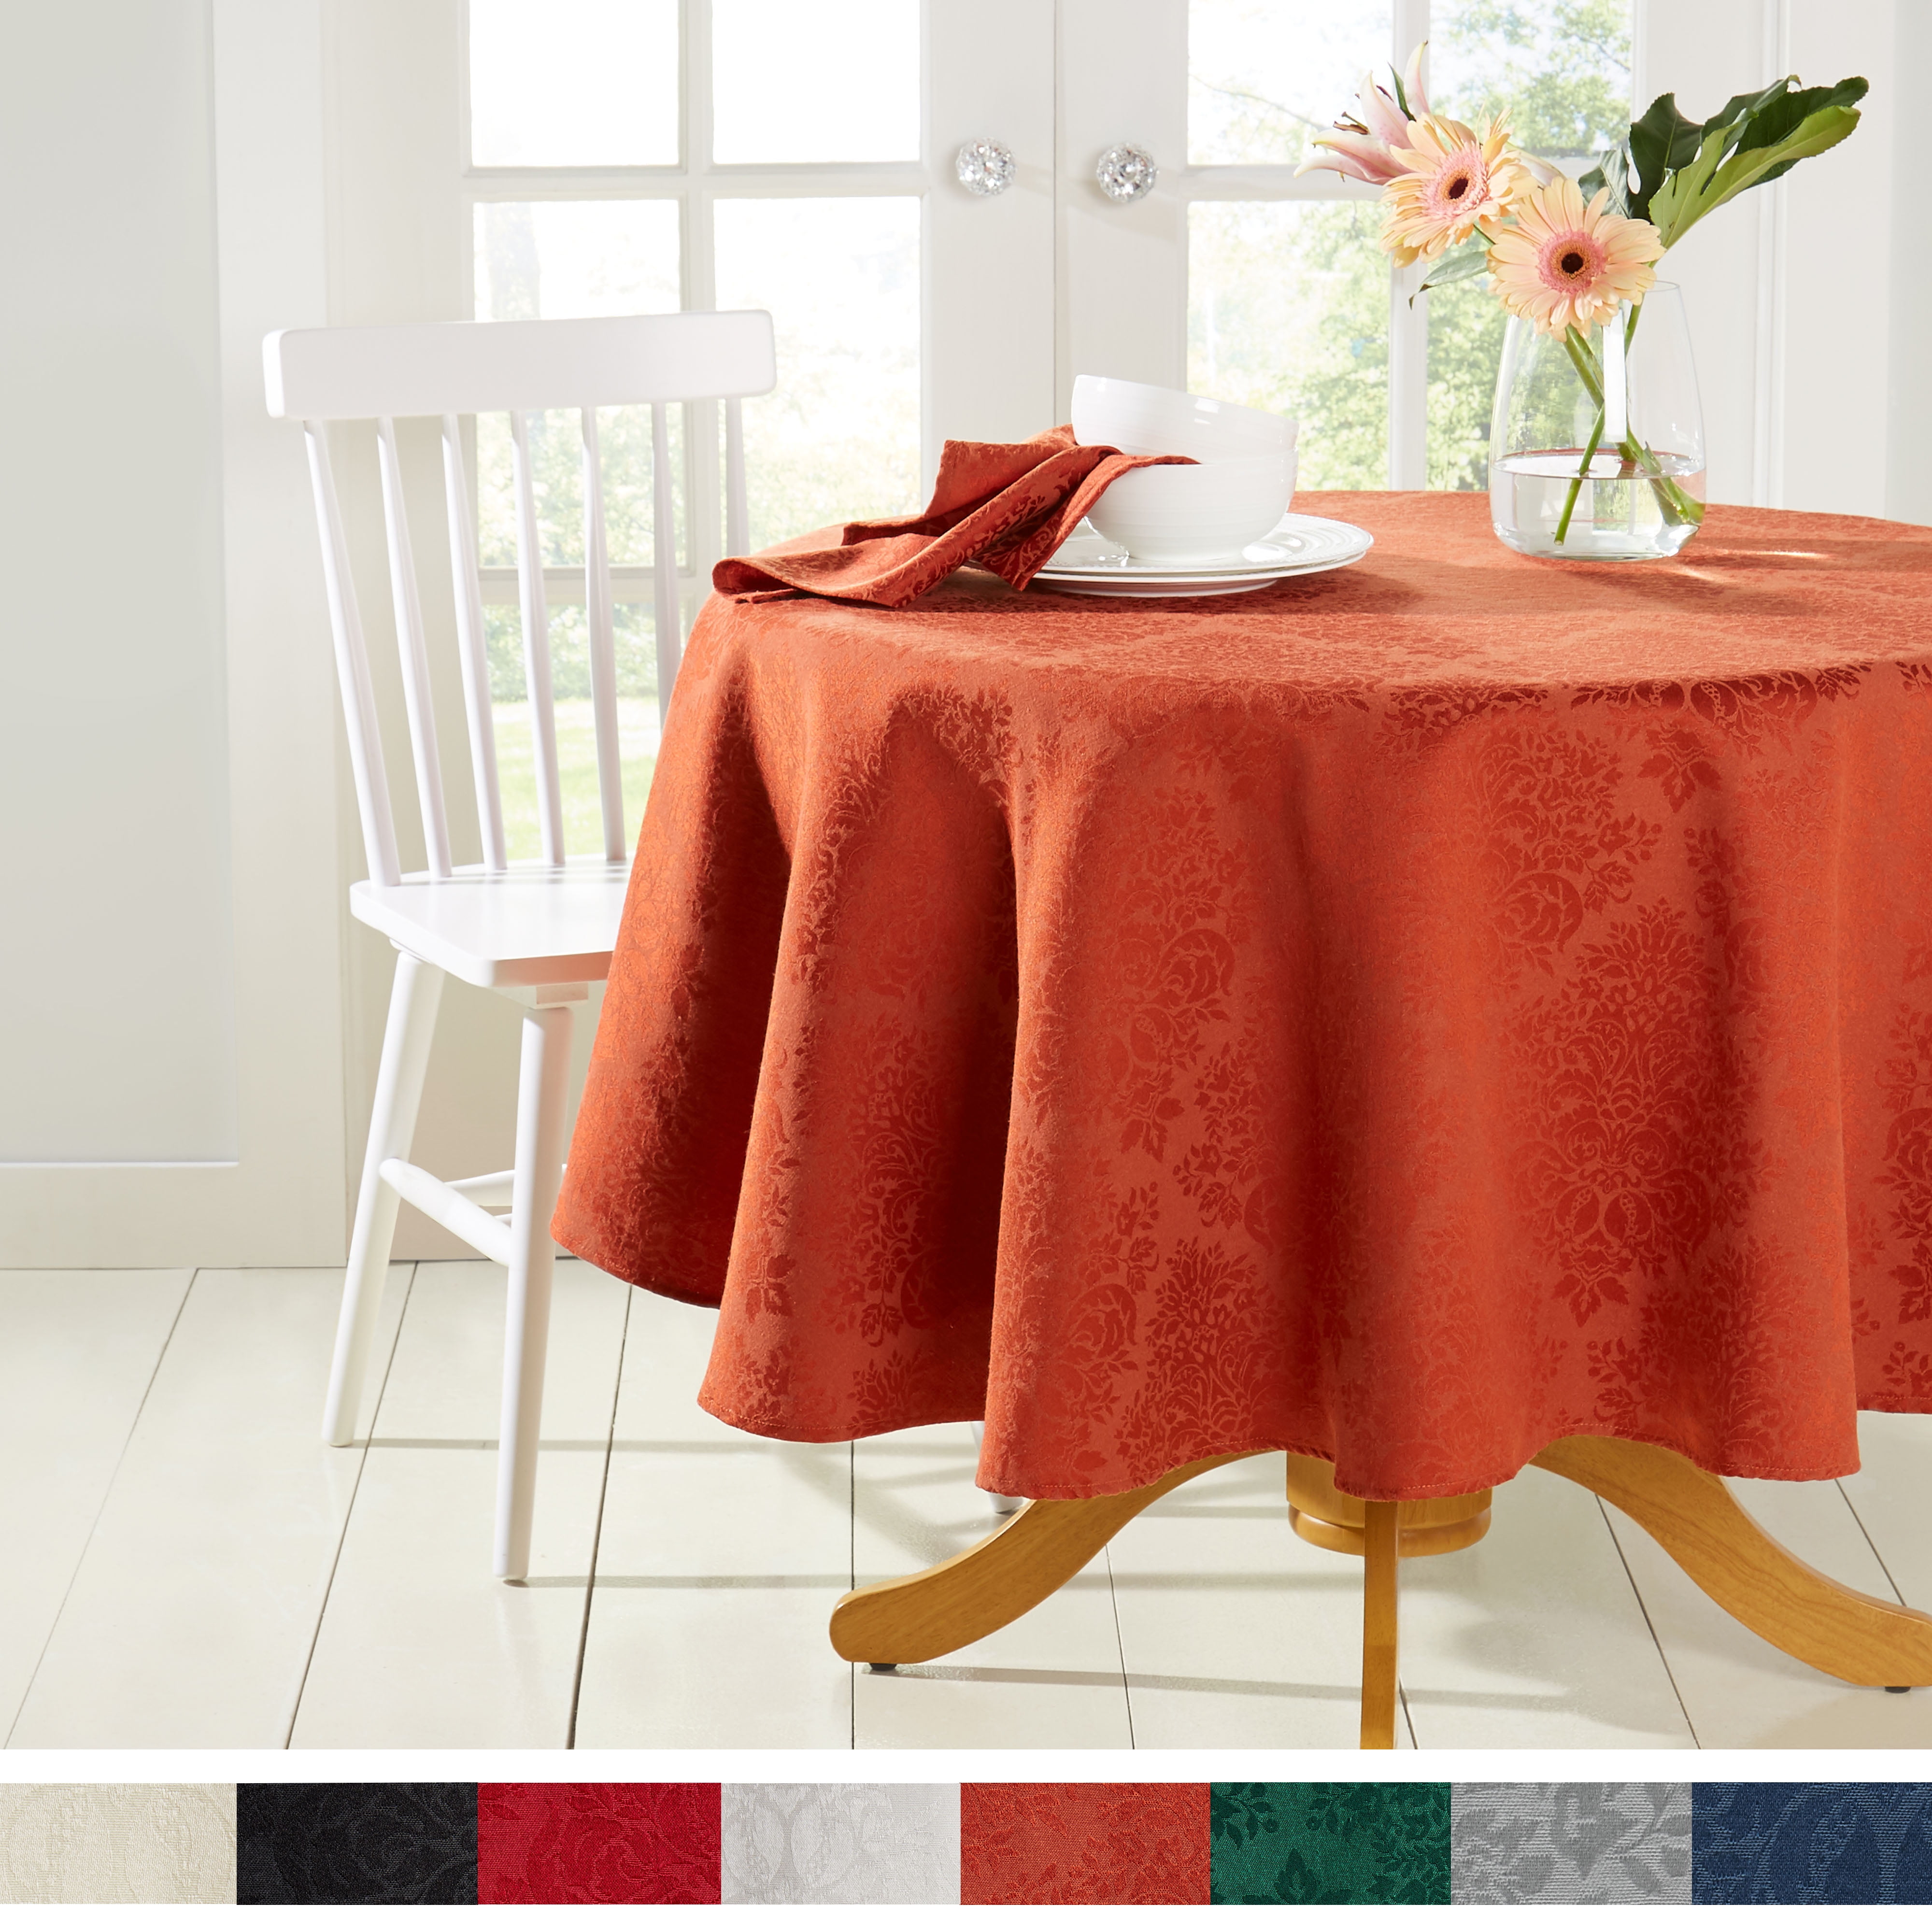 70" PARTY WEDDING GIFT DINING NEW Peach COTTON DAMASK TABLECLOTH 54" 